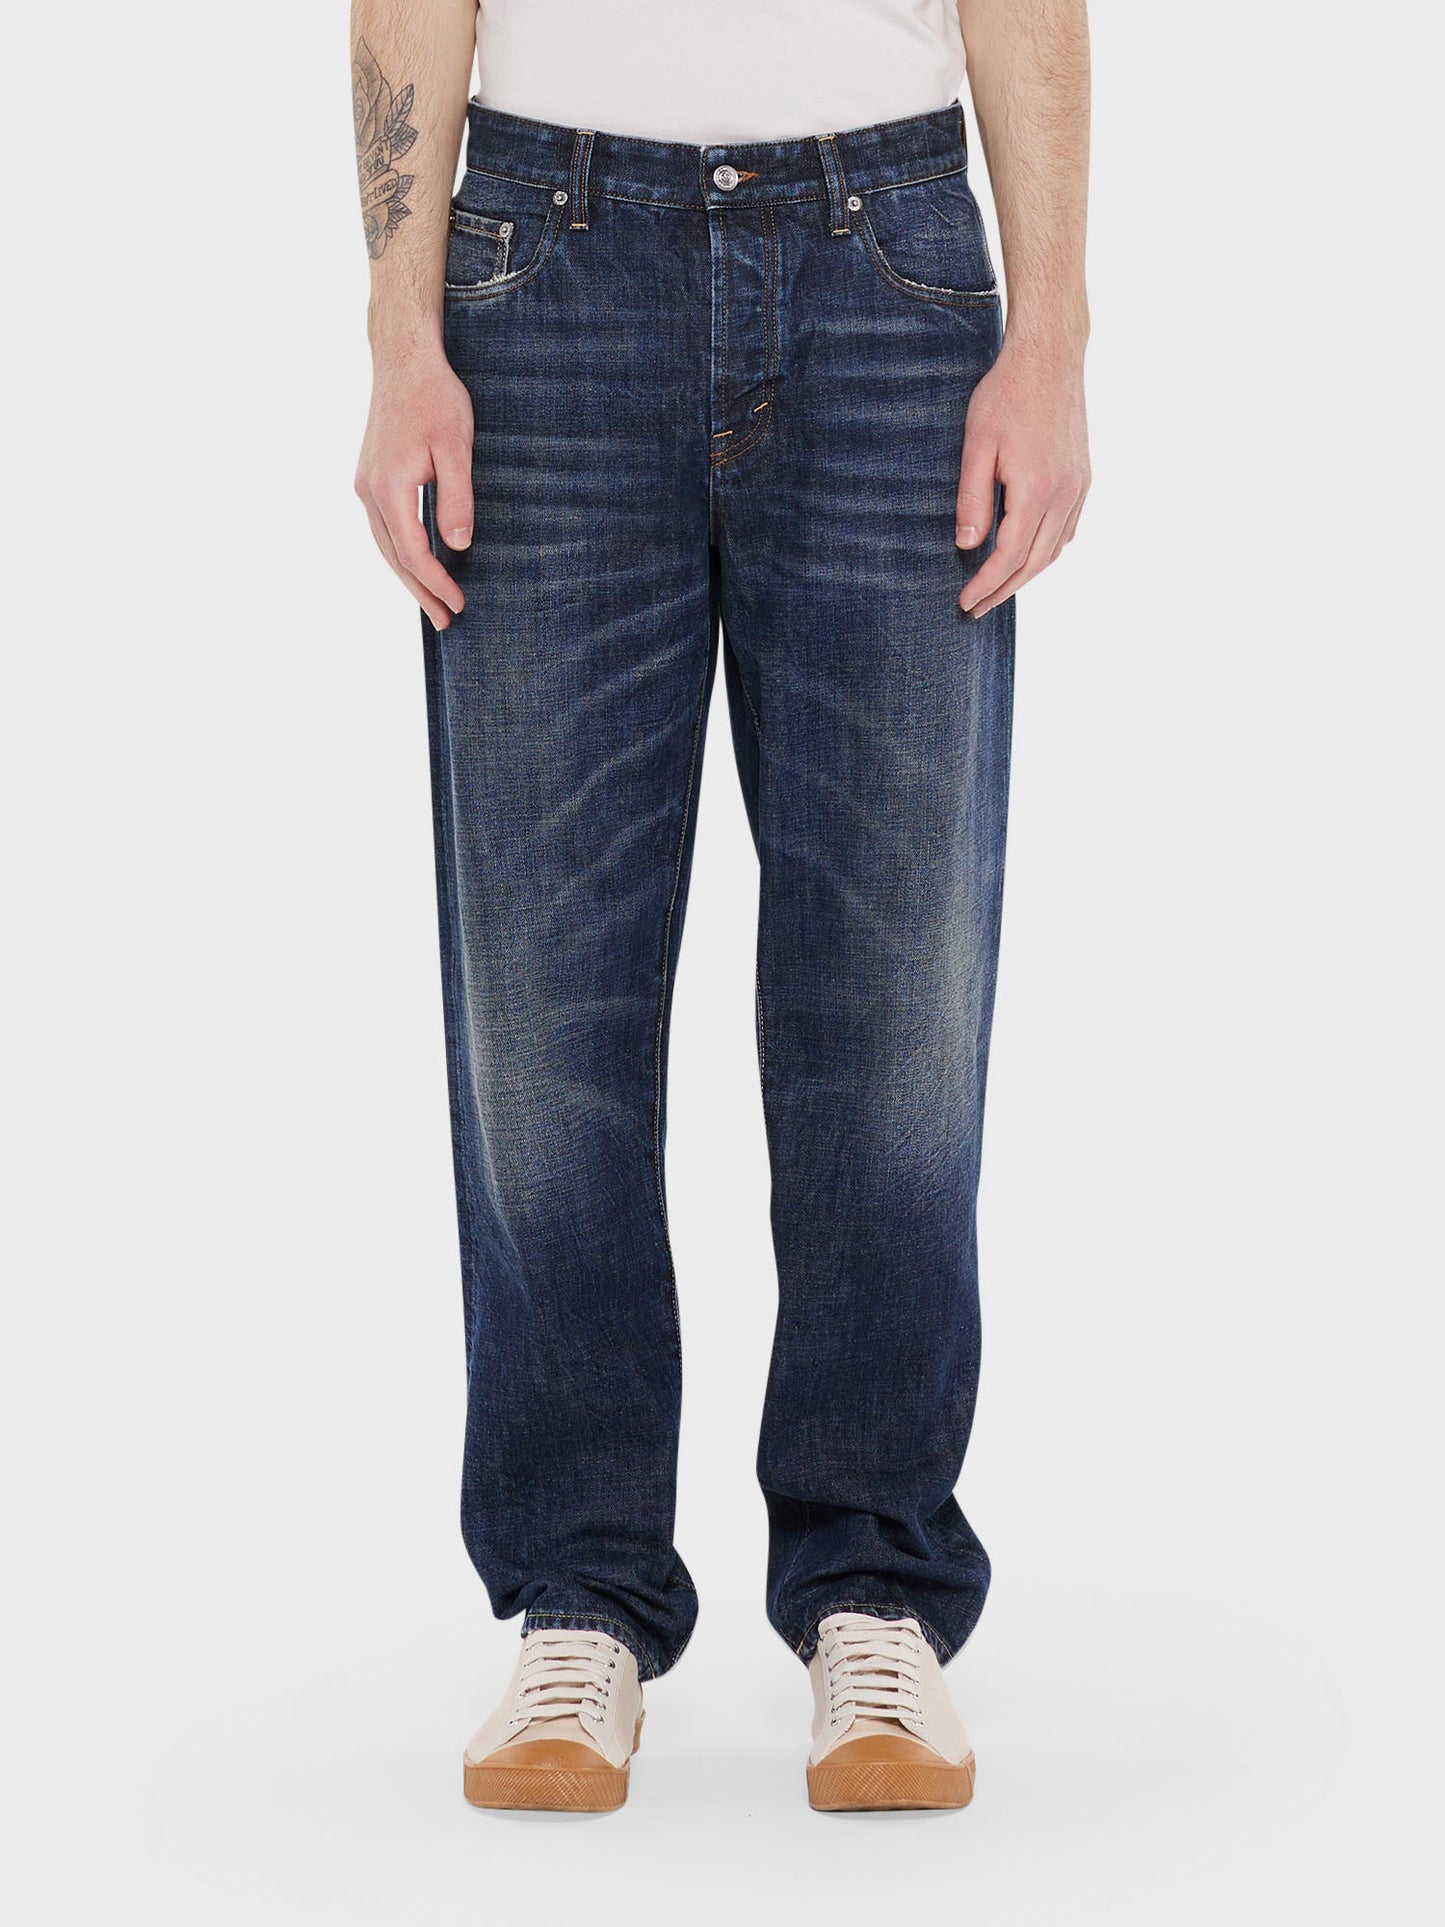 Newman relaxed-fit jeans